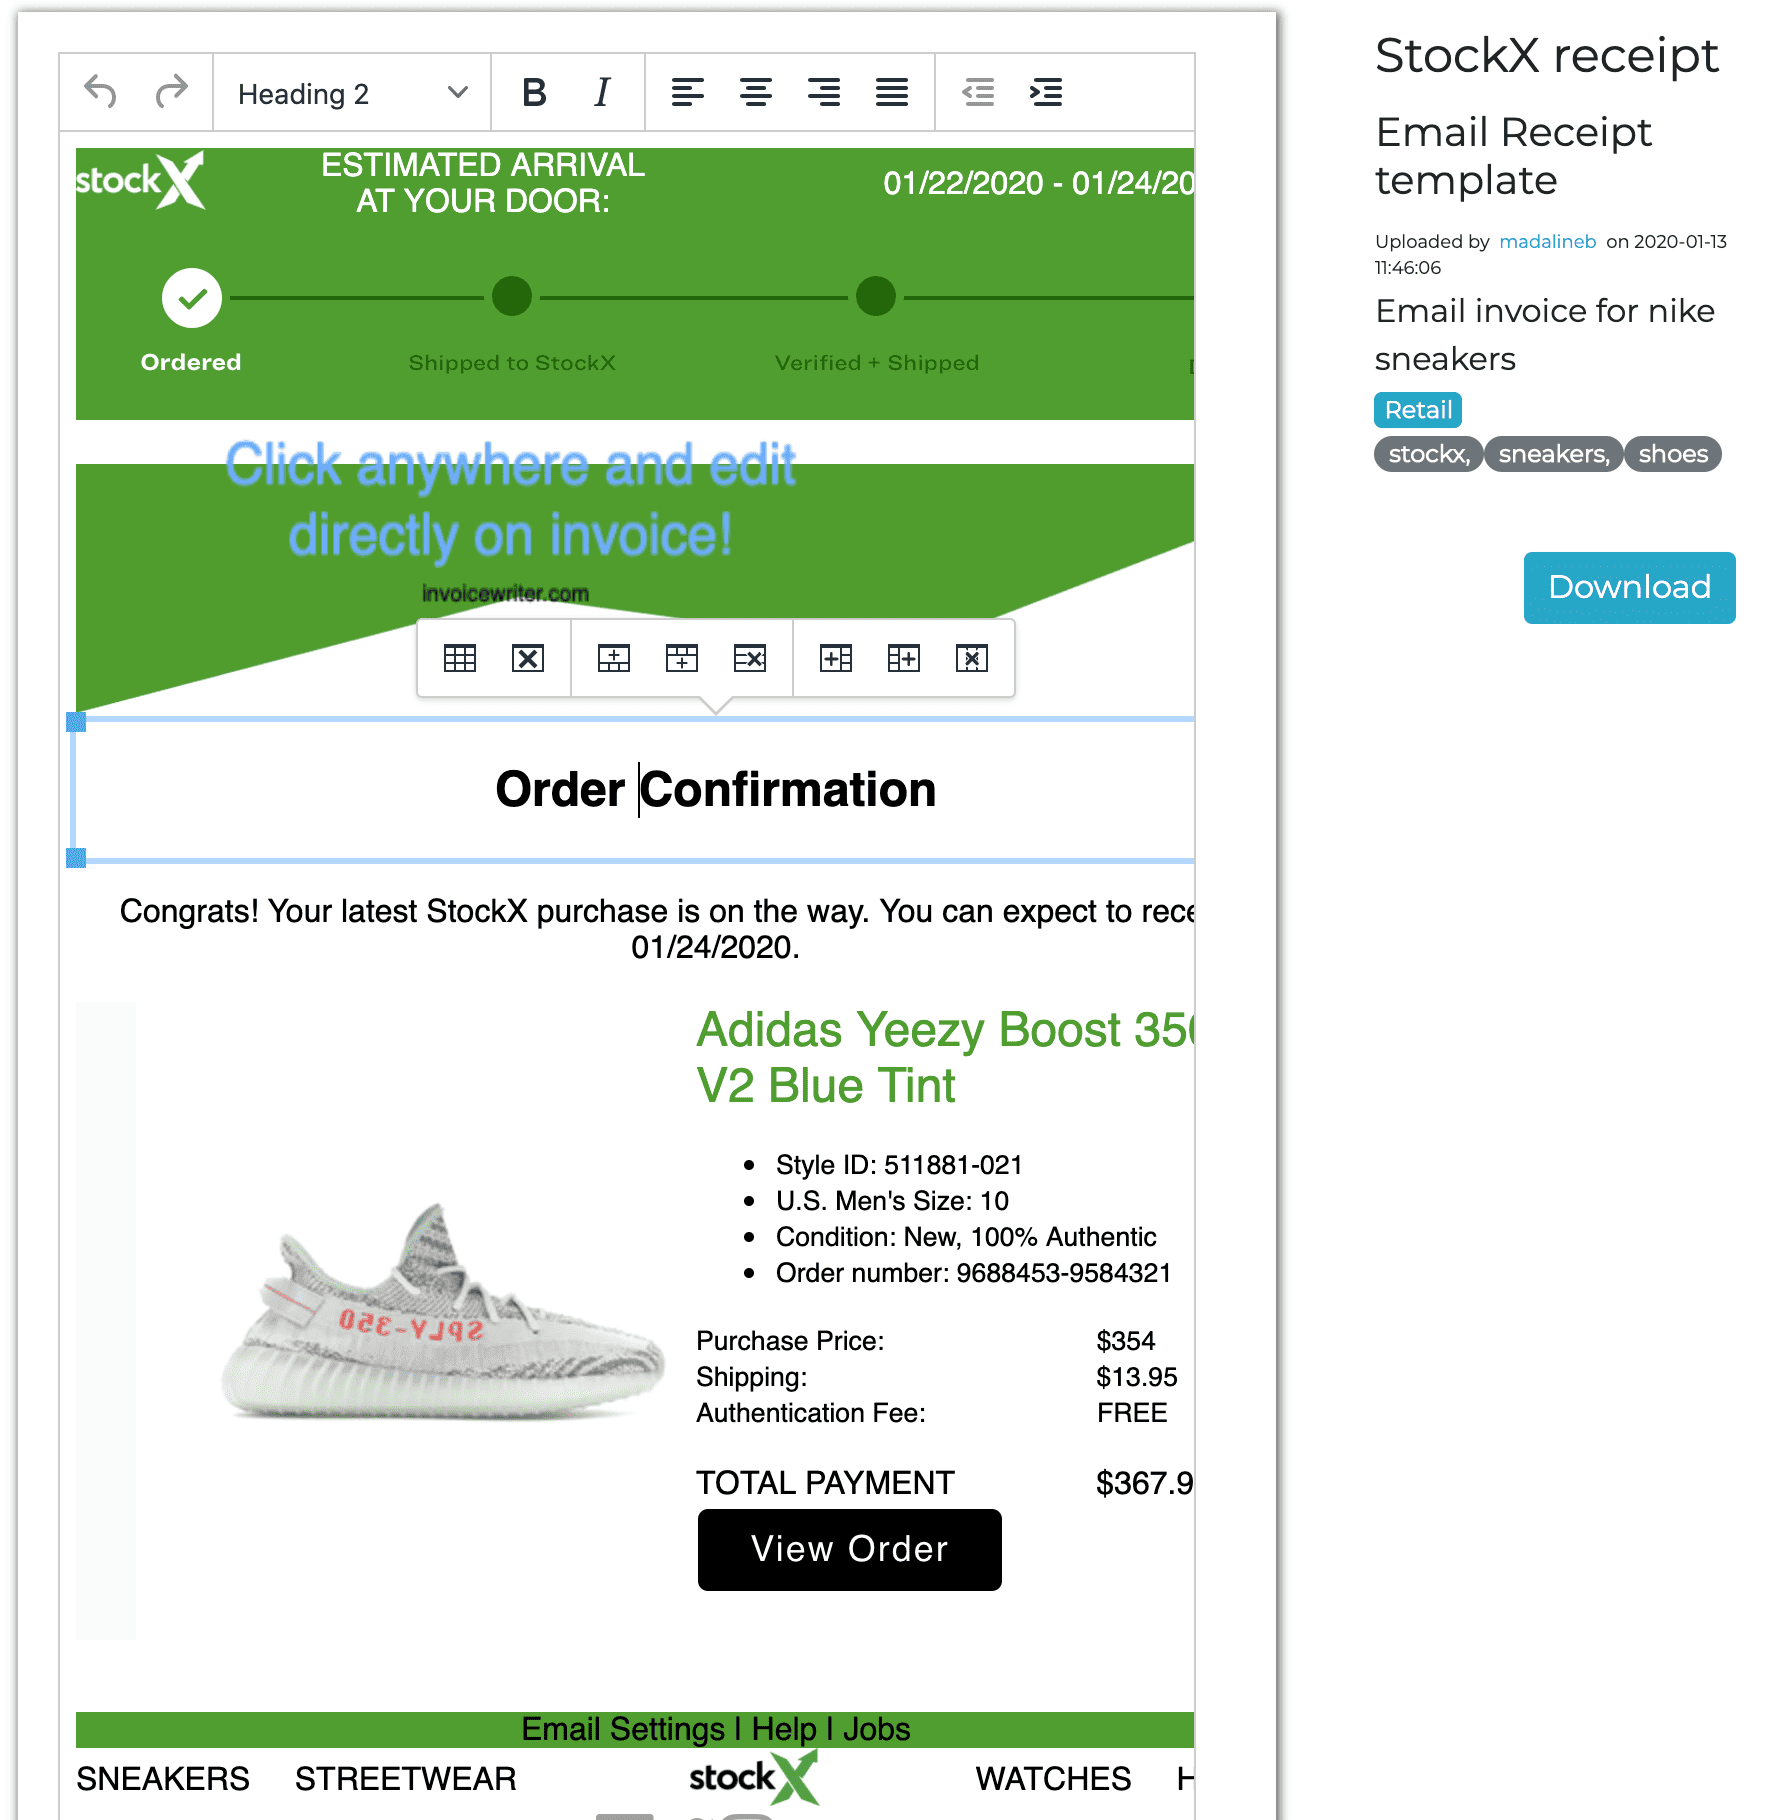 stockx email order confirmation receipt template